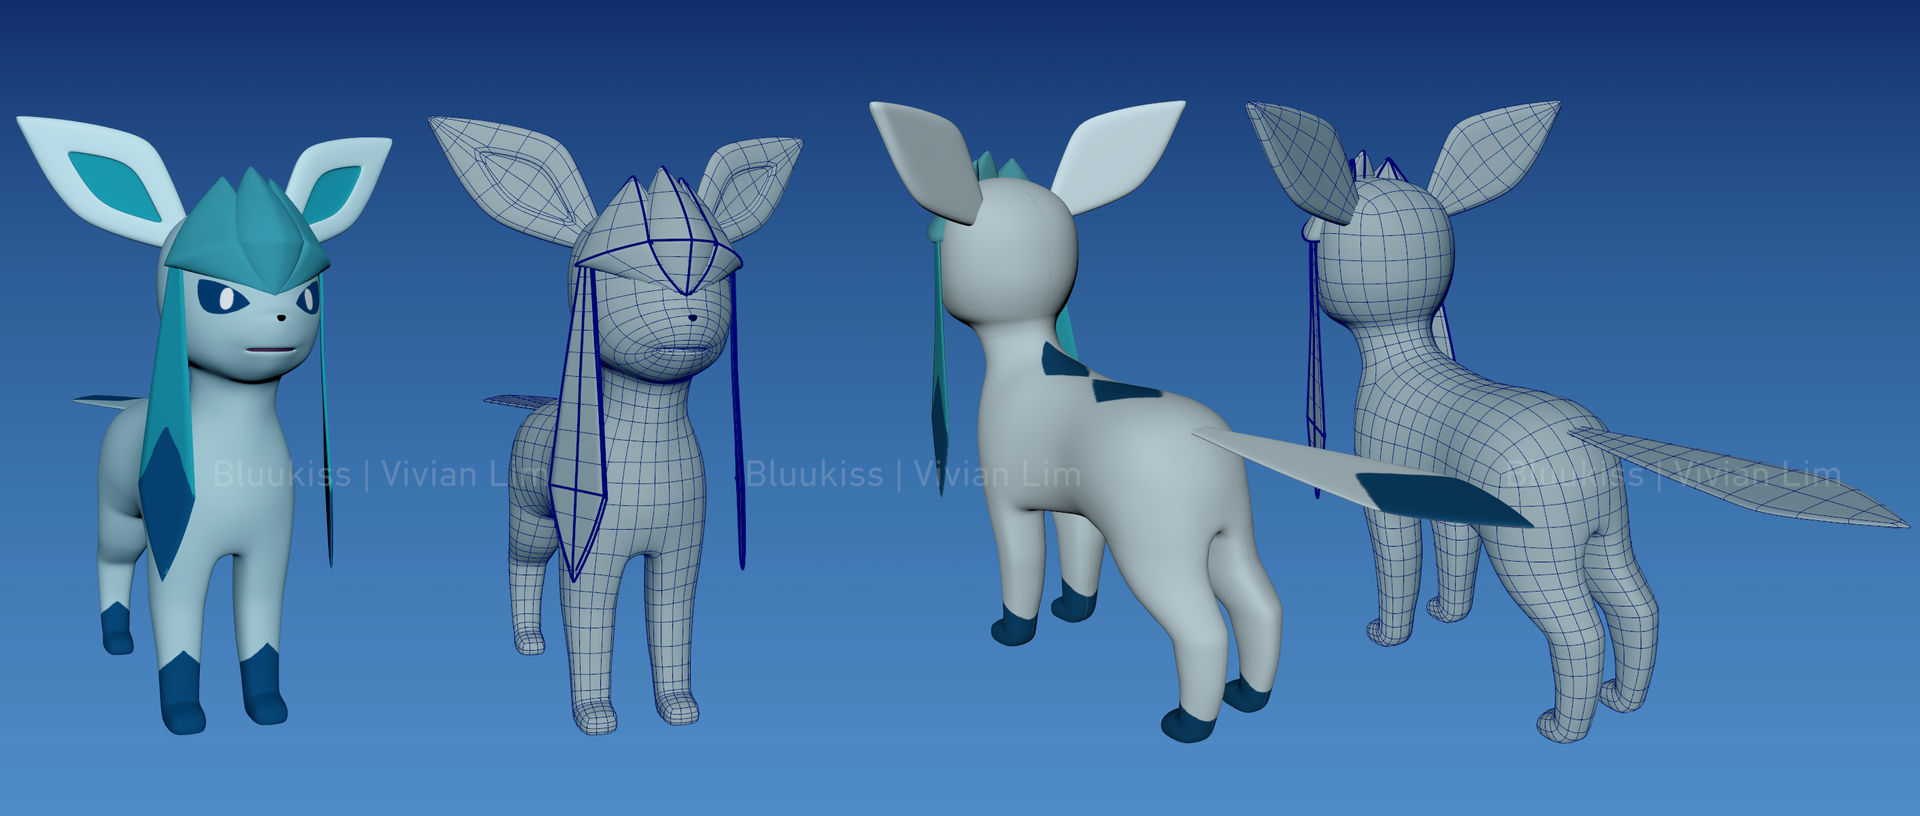 Glaceon 3d Model By Bluukiss On Deviantart